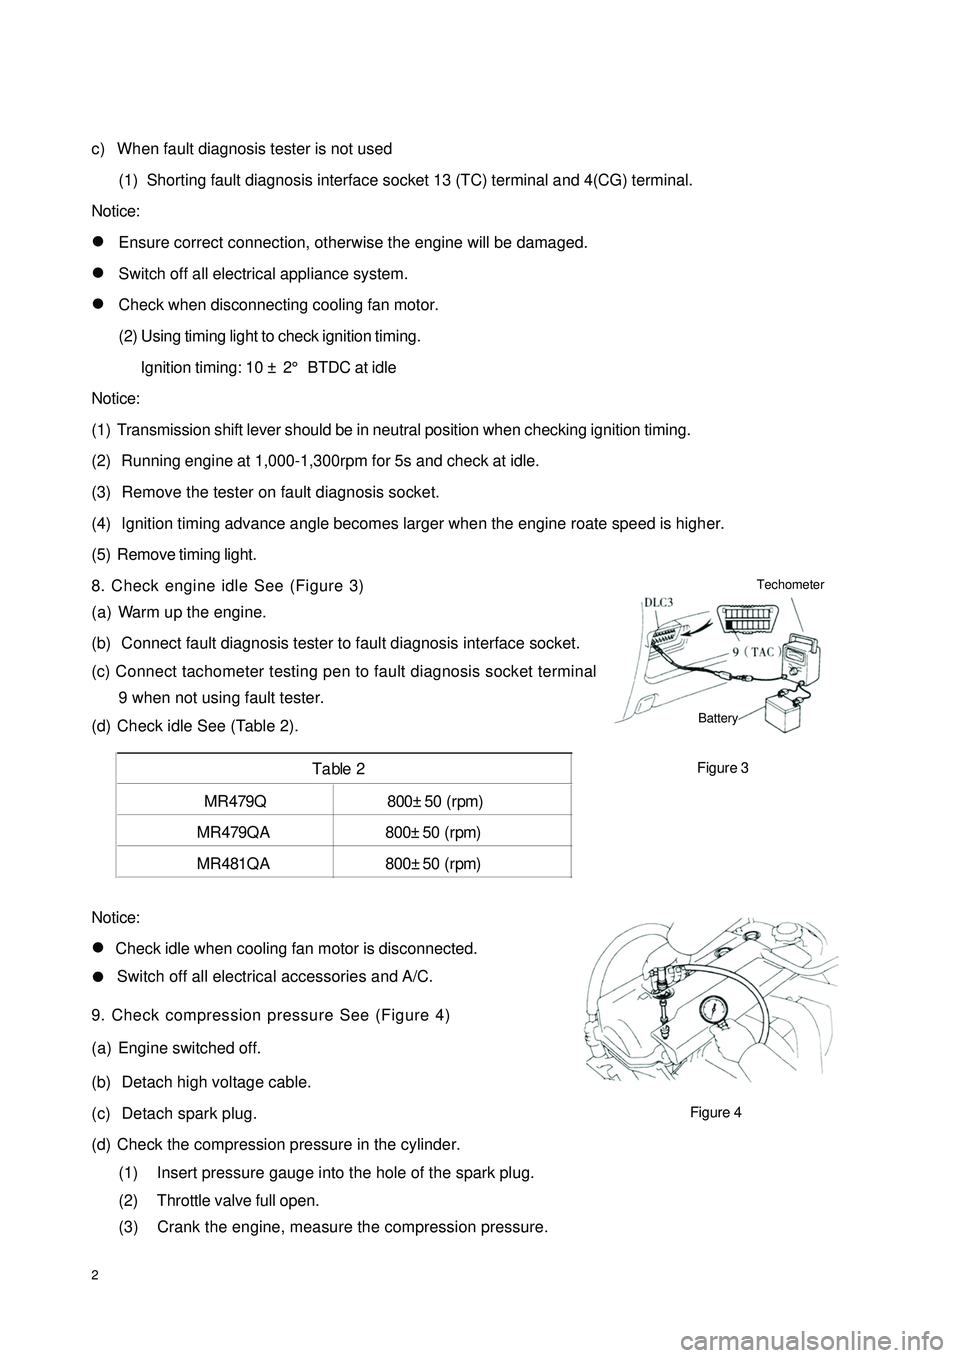 GEELY CK 2008  Workshop Manual 2c) When fault diagnosis tester is not used
(1)  Shorting fault diagnosis interface socket 13 (TC) terminal and 4(CG) terminal.
Notice:
�zEnsure correct connection, otherwise the engine will be damage